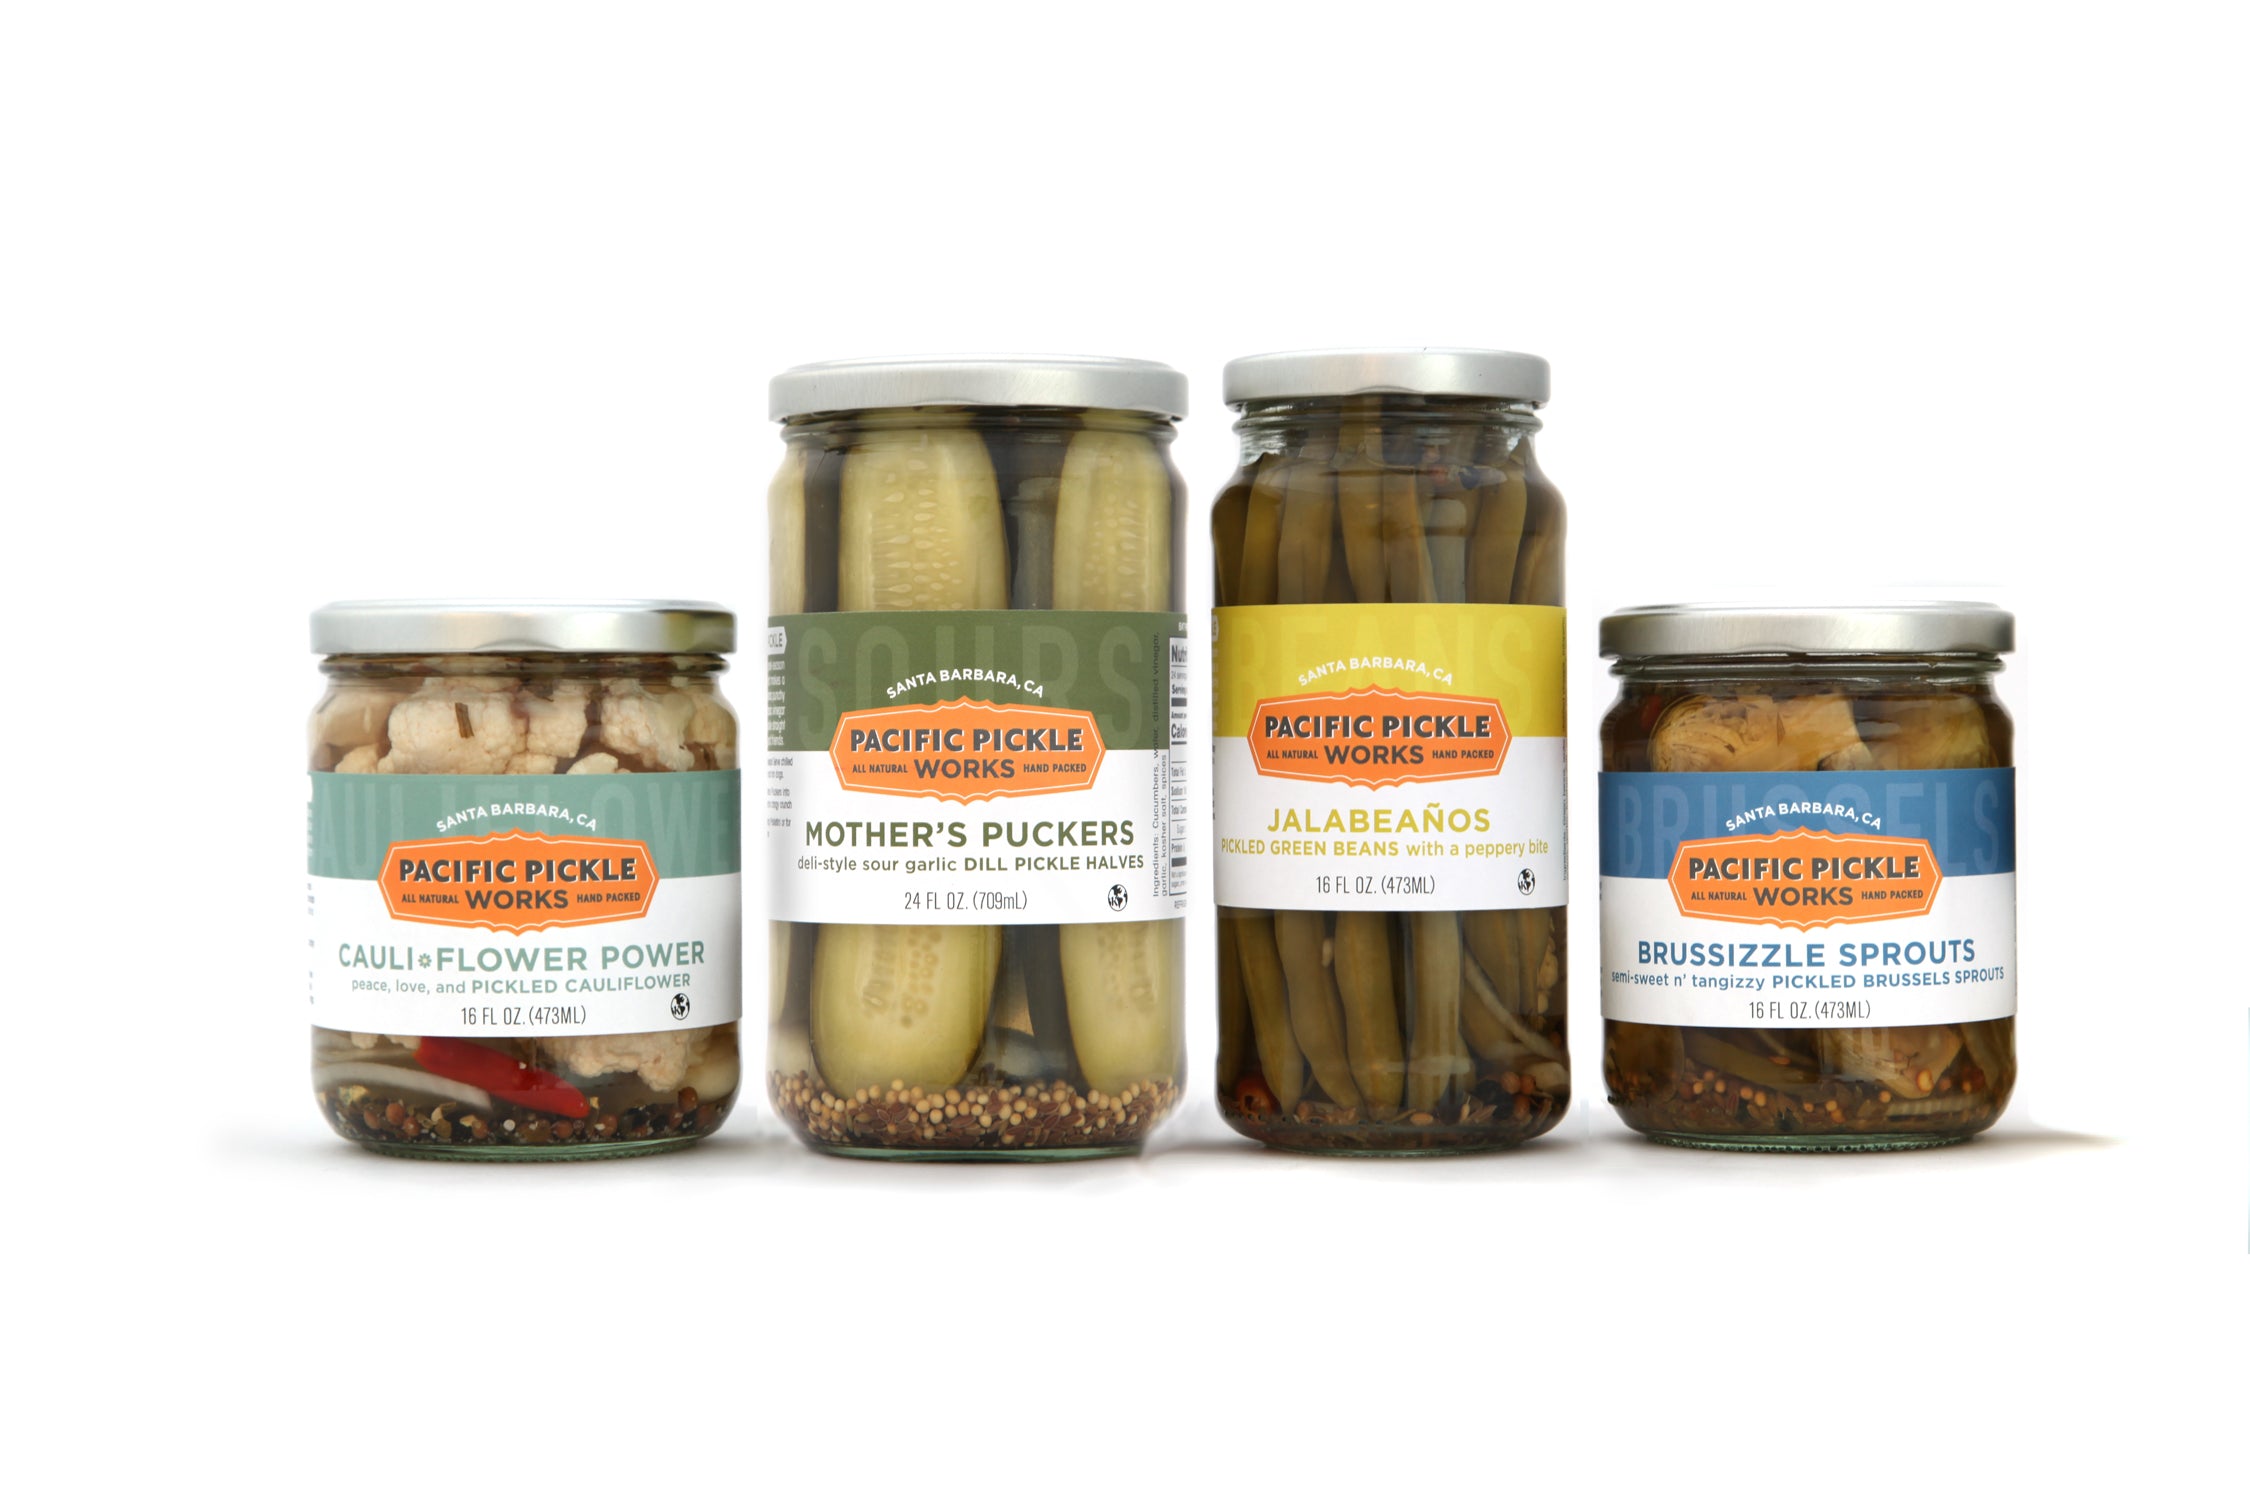 Picnic Pickles Gift Pack – Pacific Pickle Works